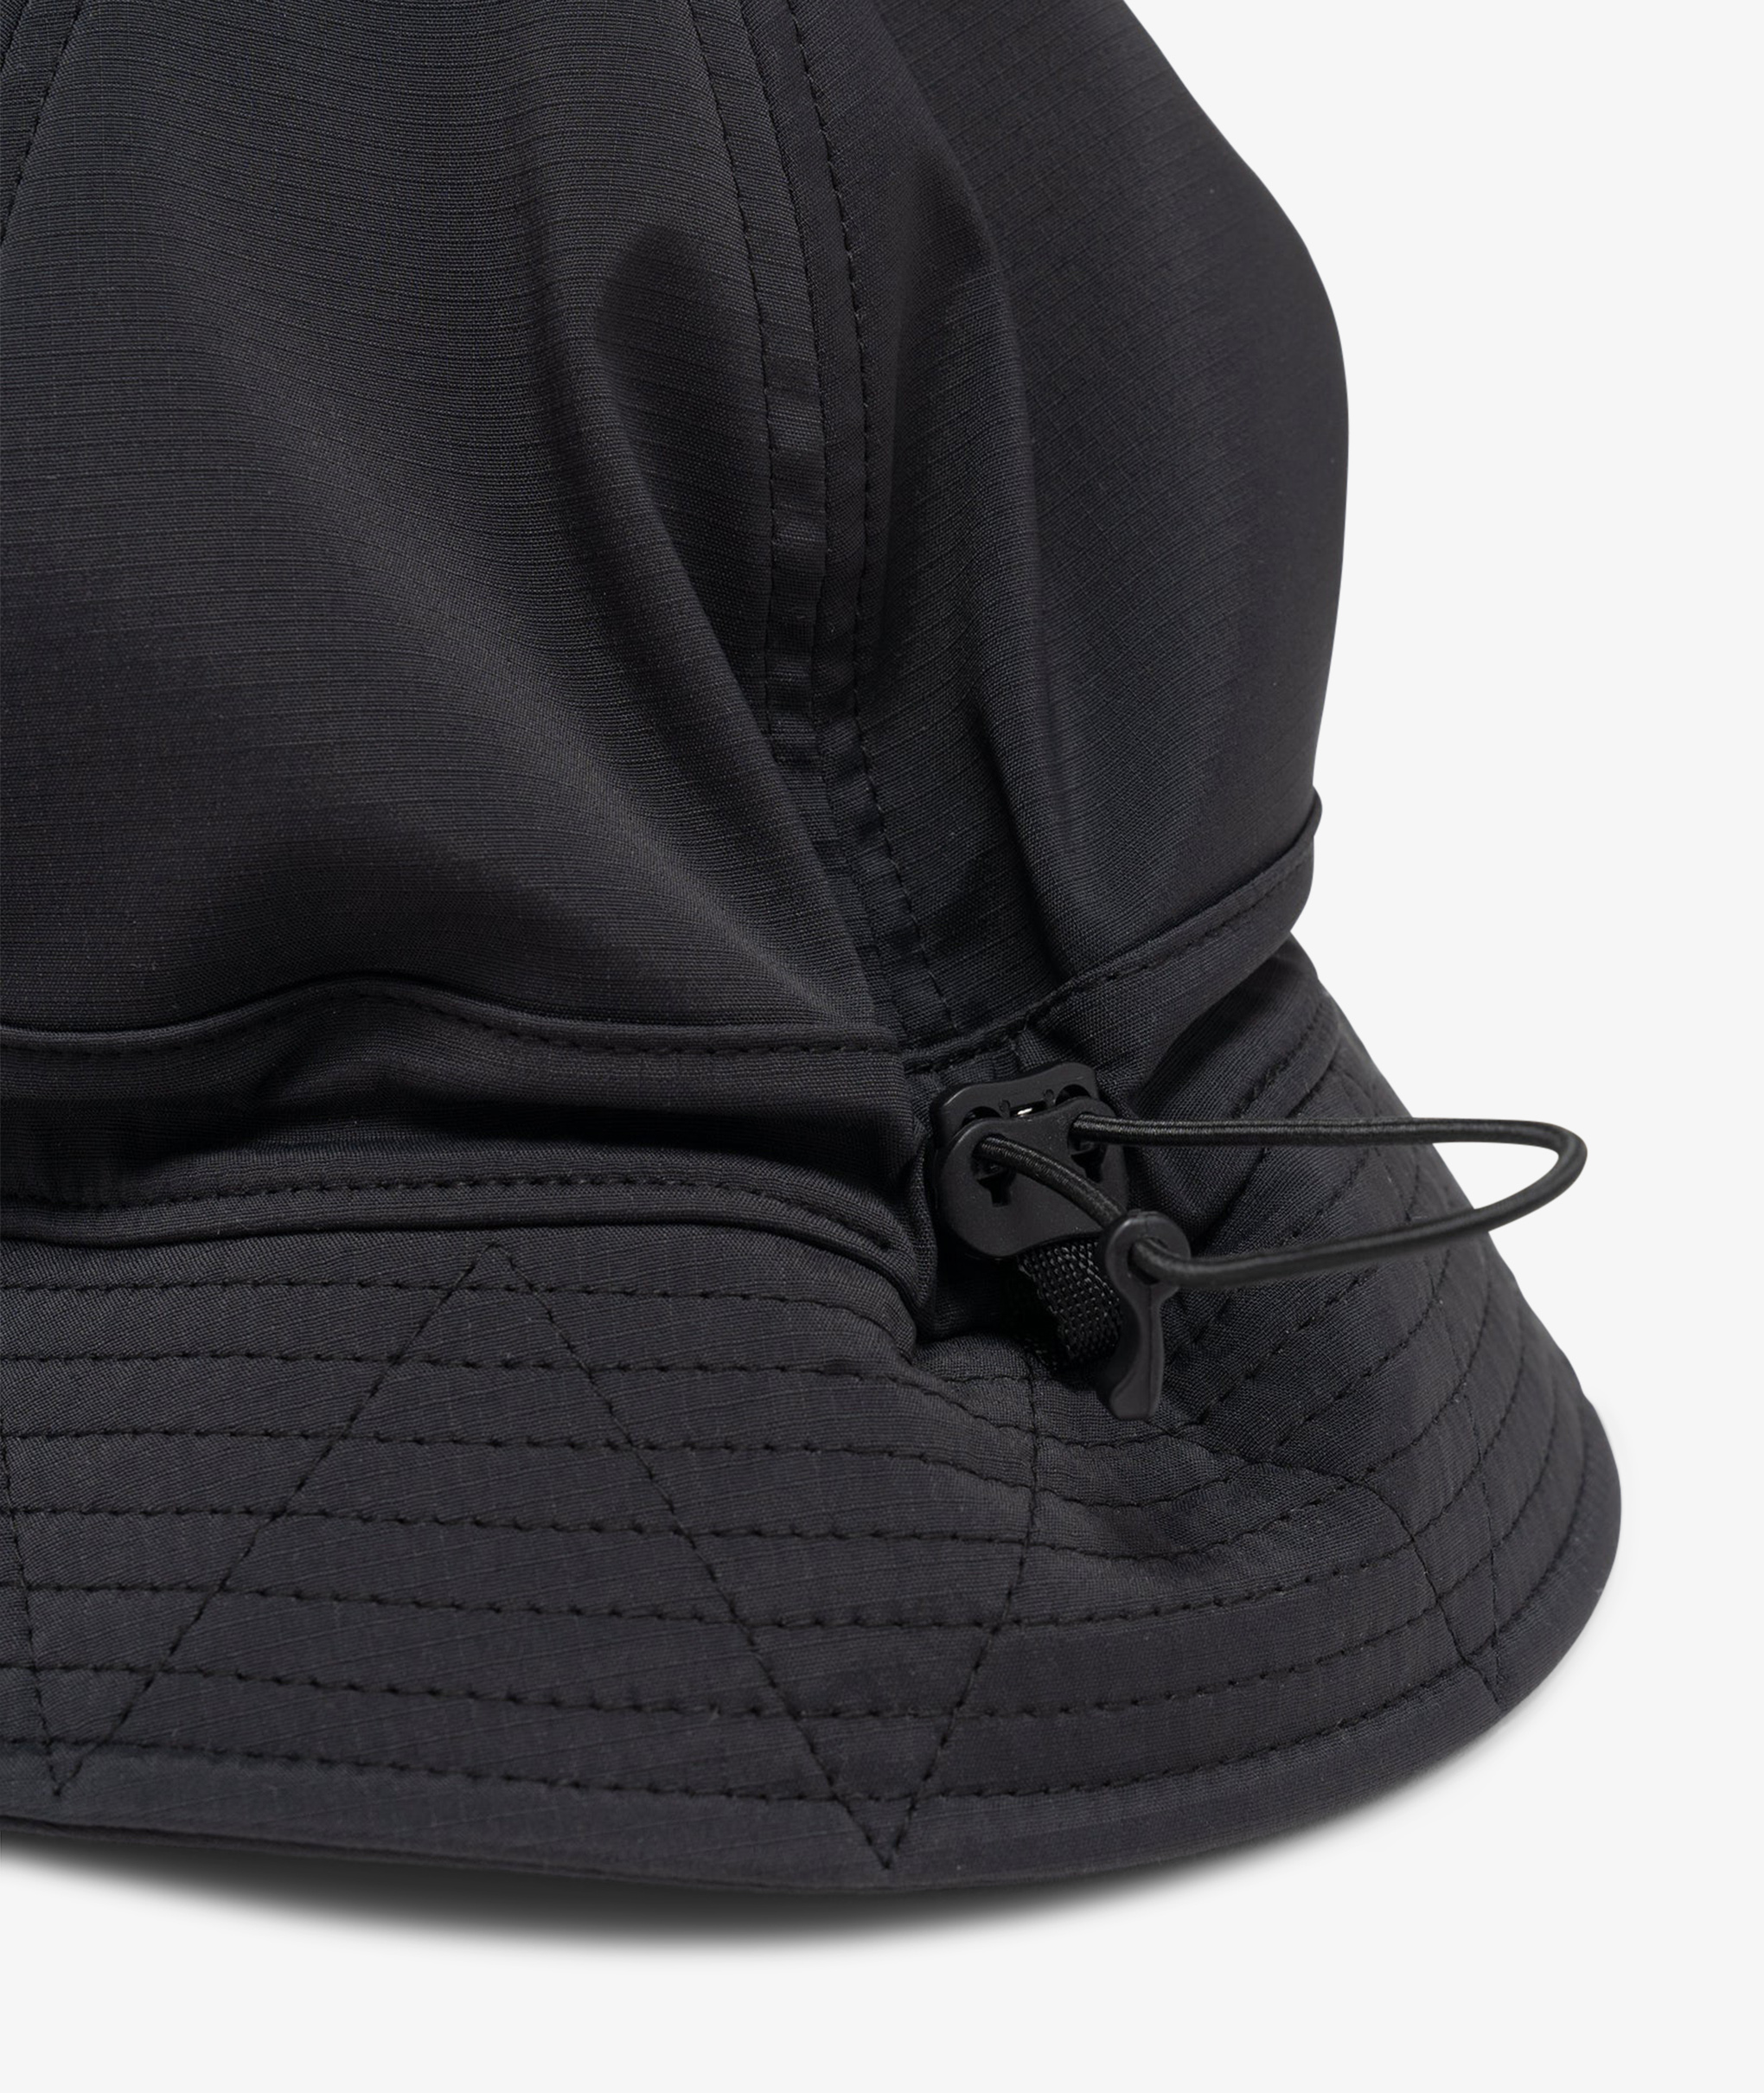 Norse Store  Shipping Worldwide - Haven Eclipse Hat - Black